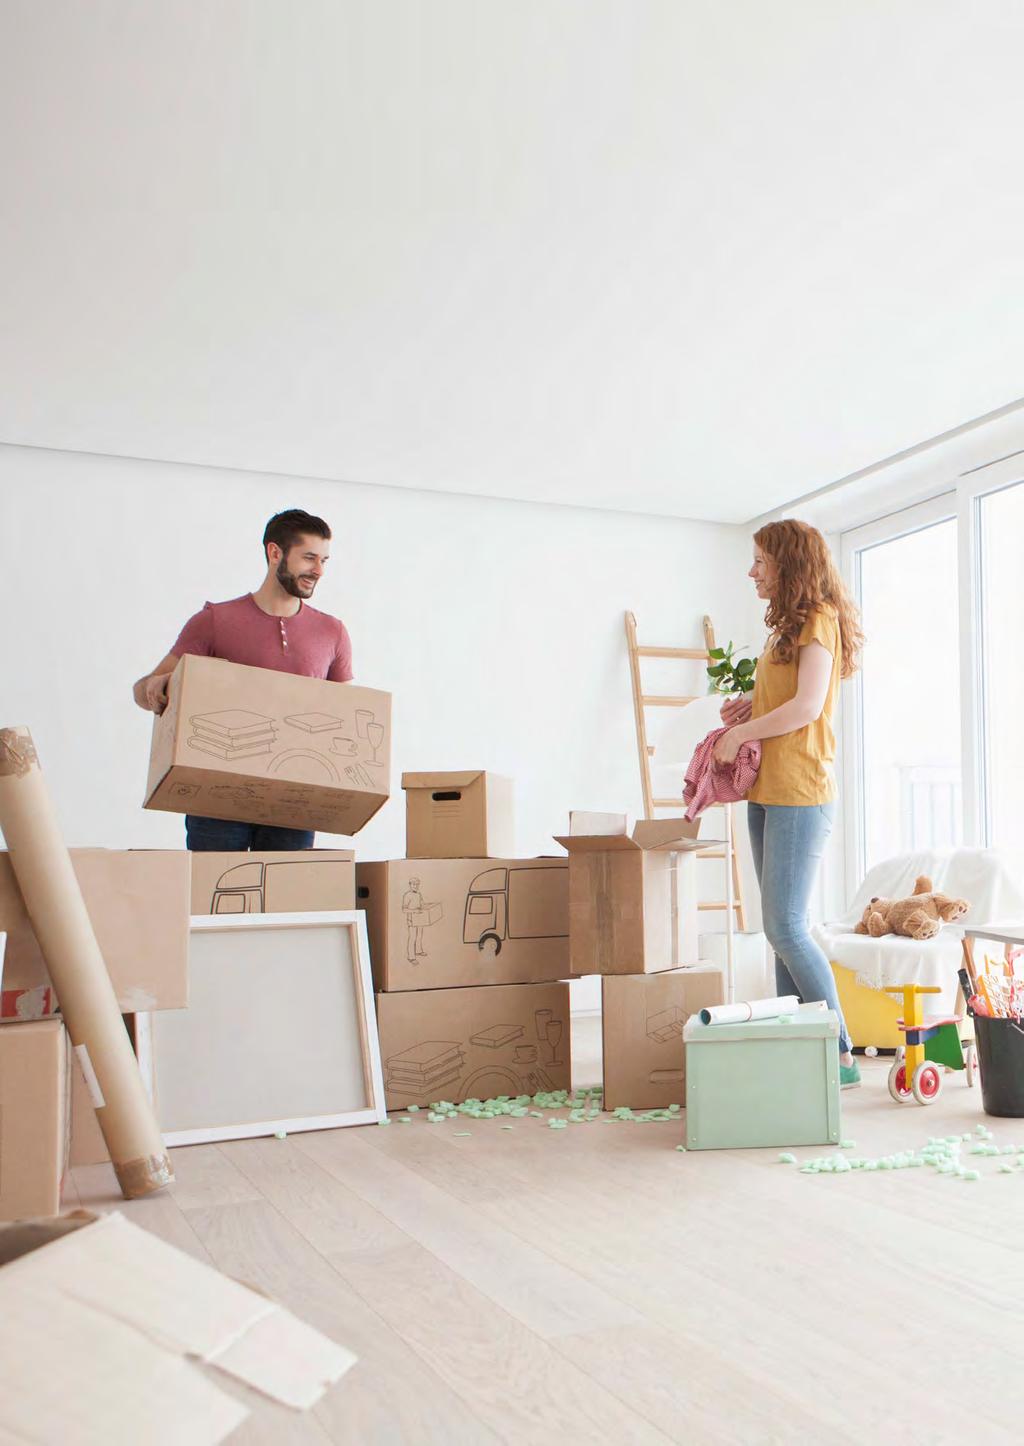 INTRODUCTION Buying a home is one of the most exciting experiences that life has to offer. That said, finding the perfect home to fit your needs can take a great deal of time and effort.